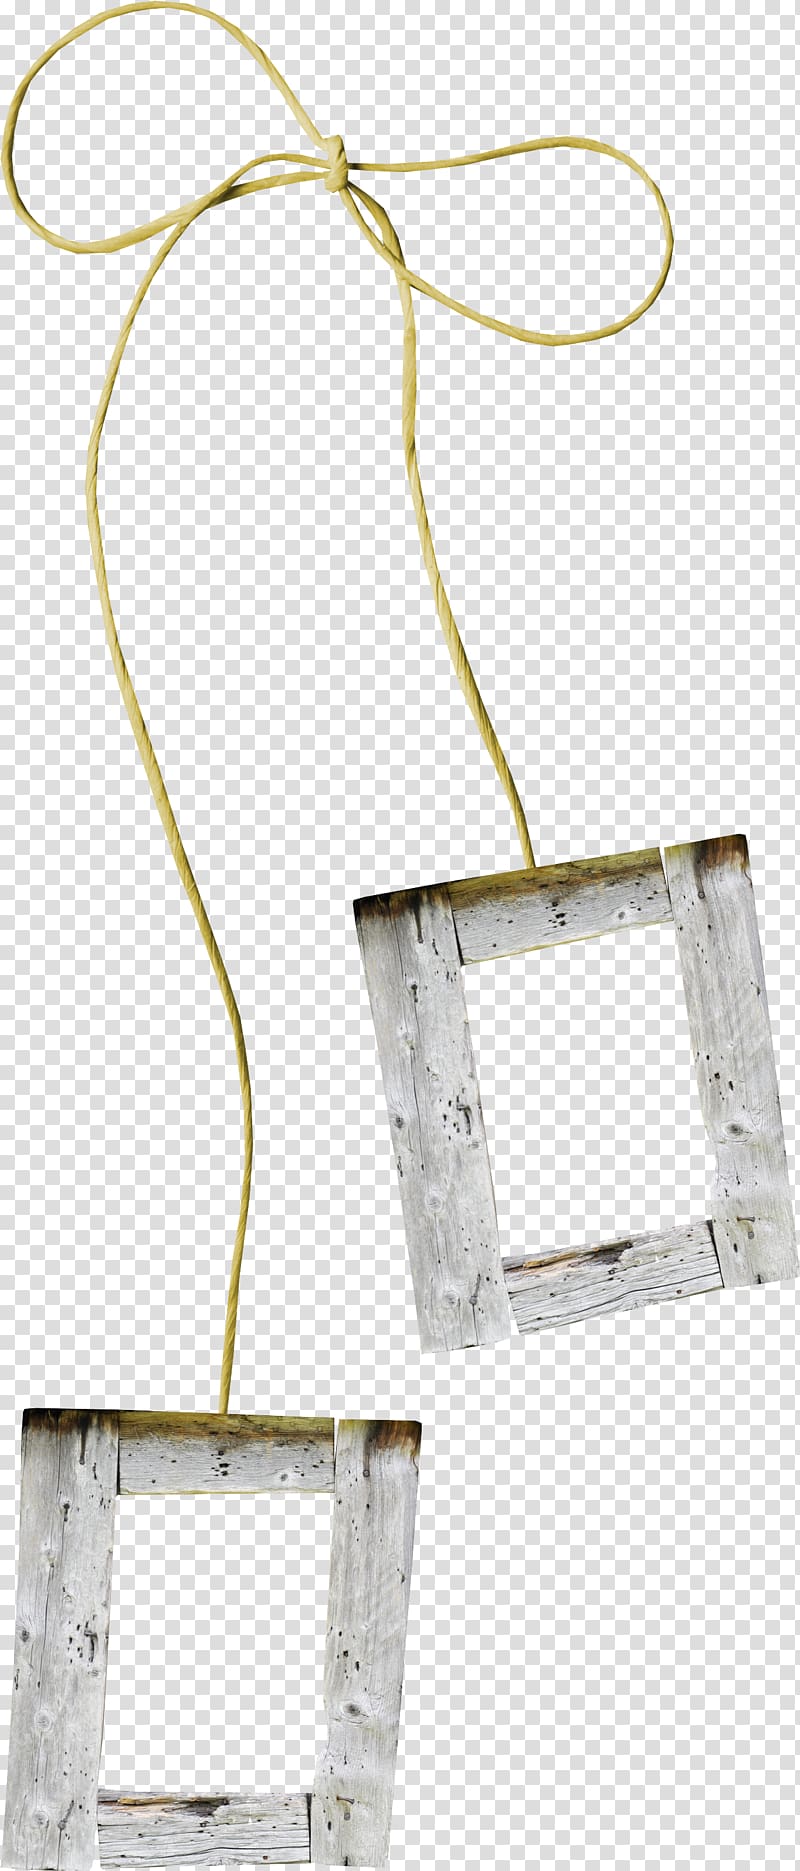 two square gray wooden frames with ropes, Rope Shoelace knot Ribbon, Bow rope frame transparent background PNG clipart